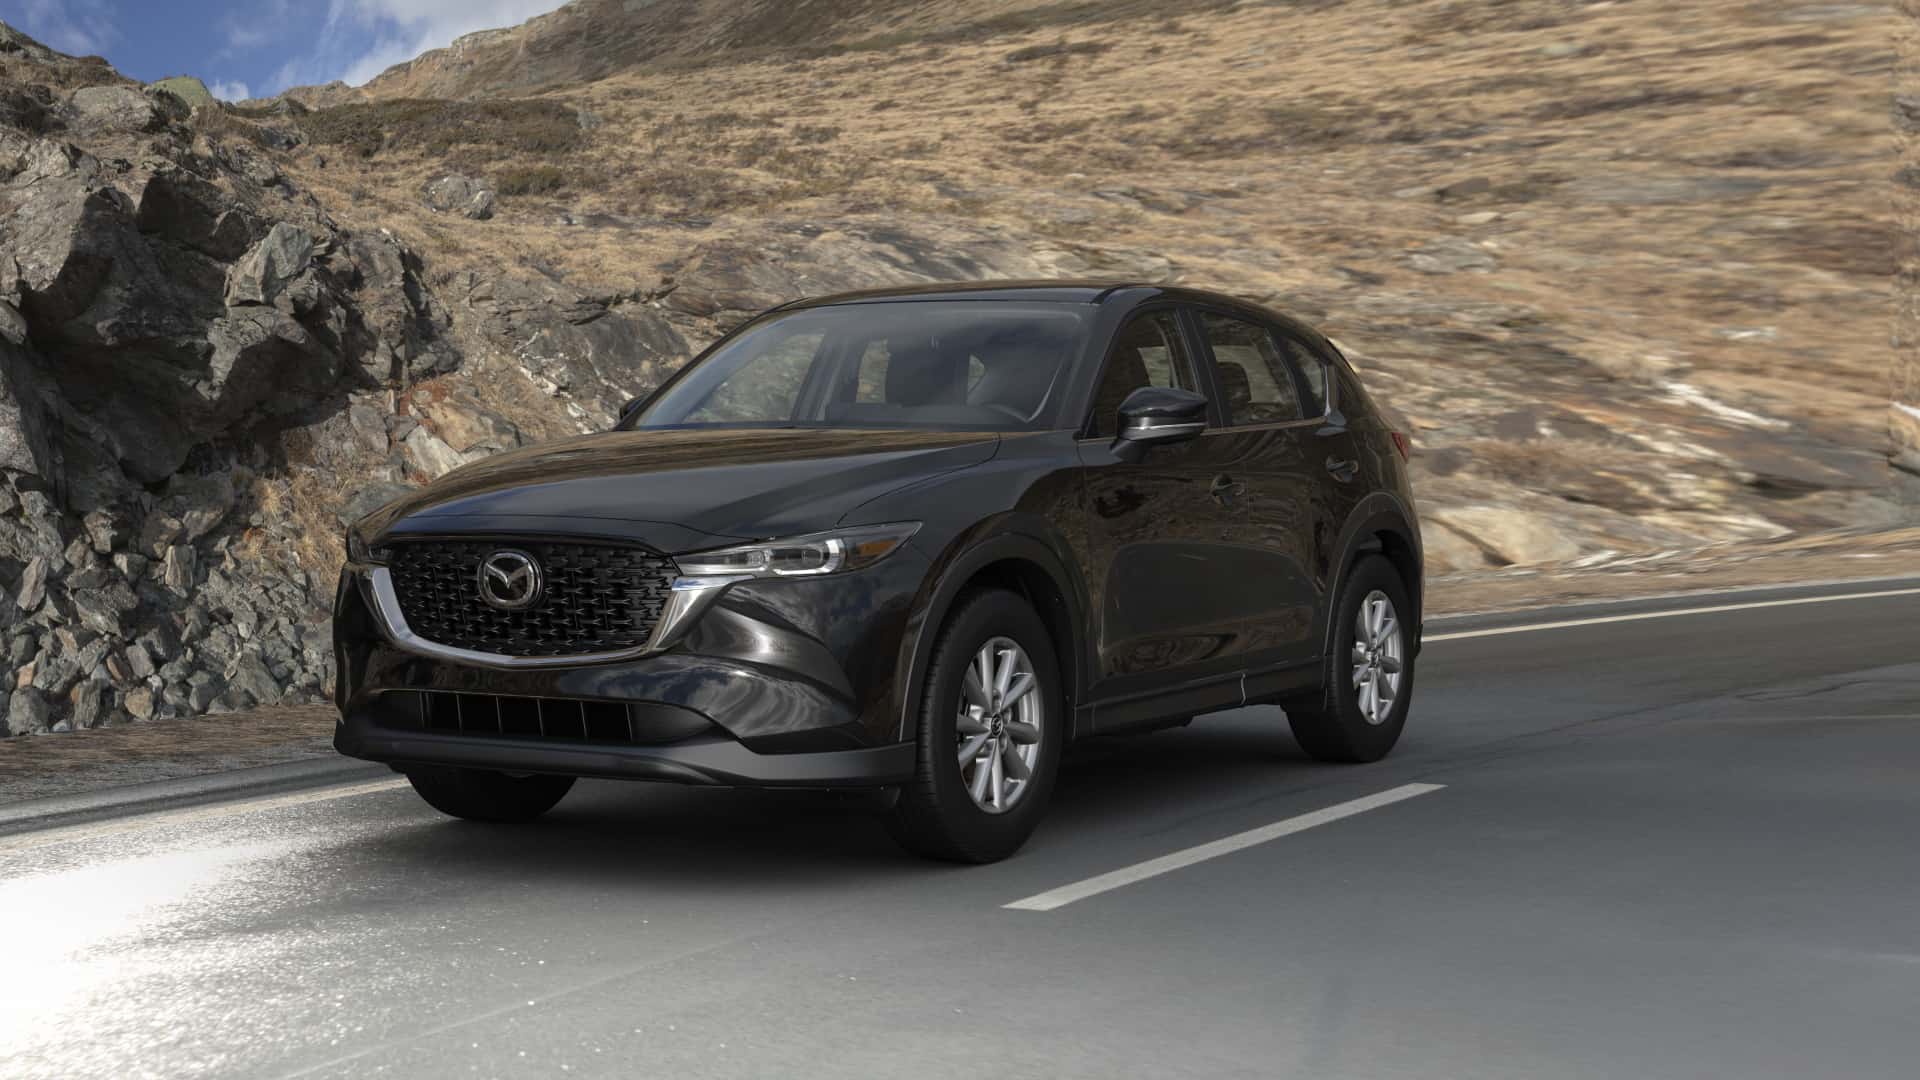 2023 Mazda CX-5 2.5 S Deep Crystal Blue Mica | Bommarito Mazda South County in St. Louis MO